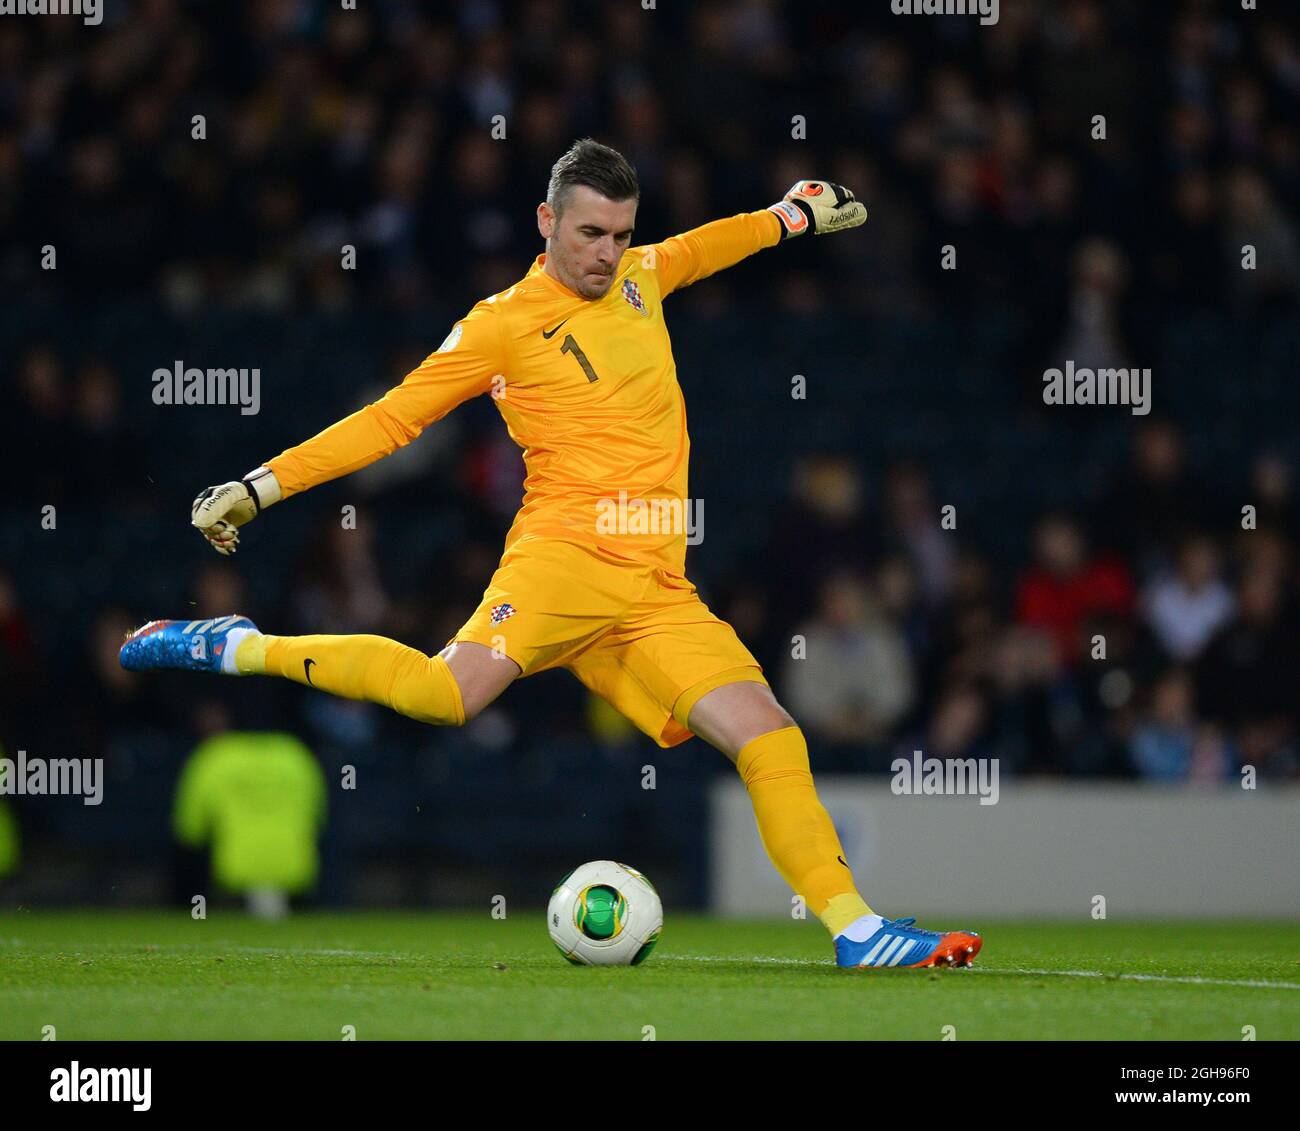 Stipe Pletikosa of Croatia in action during their FIFA World Cup 2014 qualifier soccer match between Scotland and Croatia at the Hampden Park Stadium in Glasgow, United Kingdom , Oct. 15, 2013. Picture Simon Bellis Stock Photo